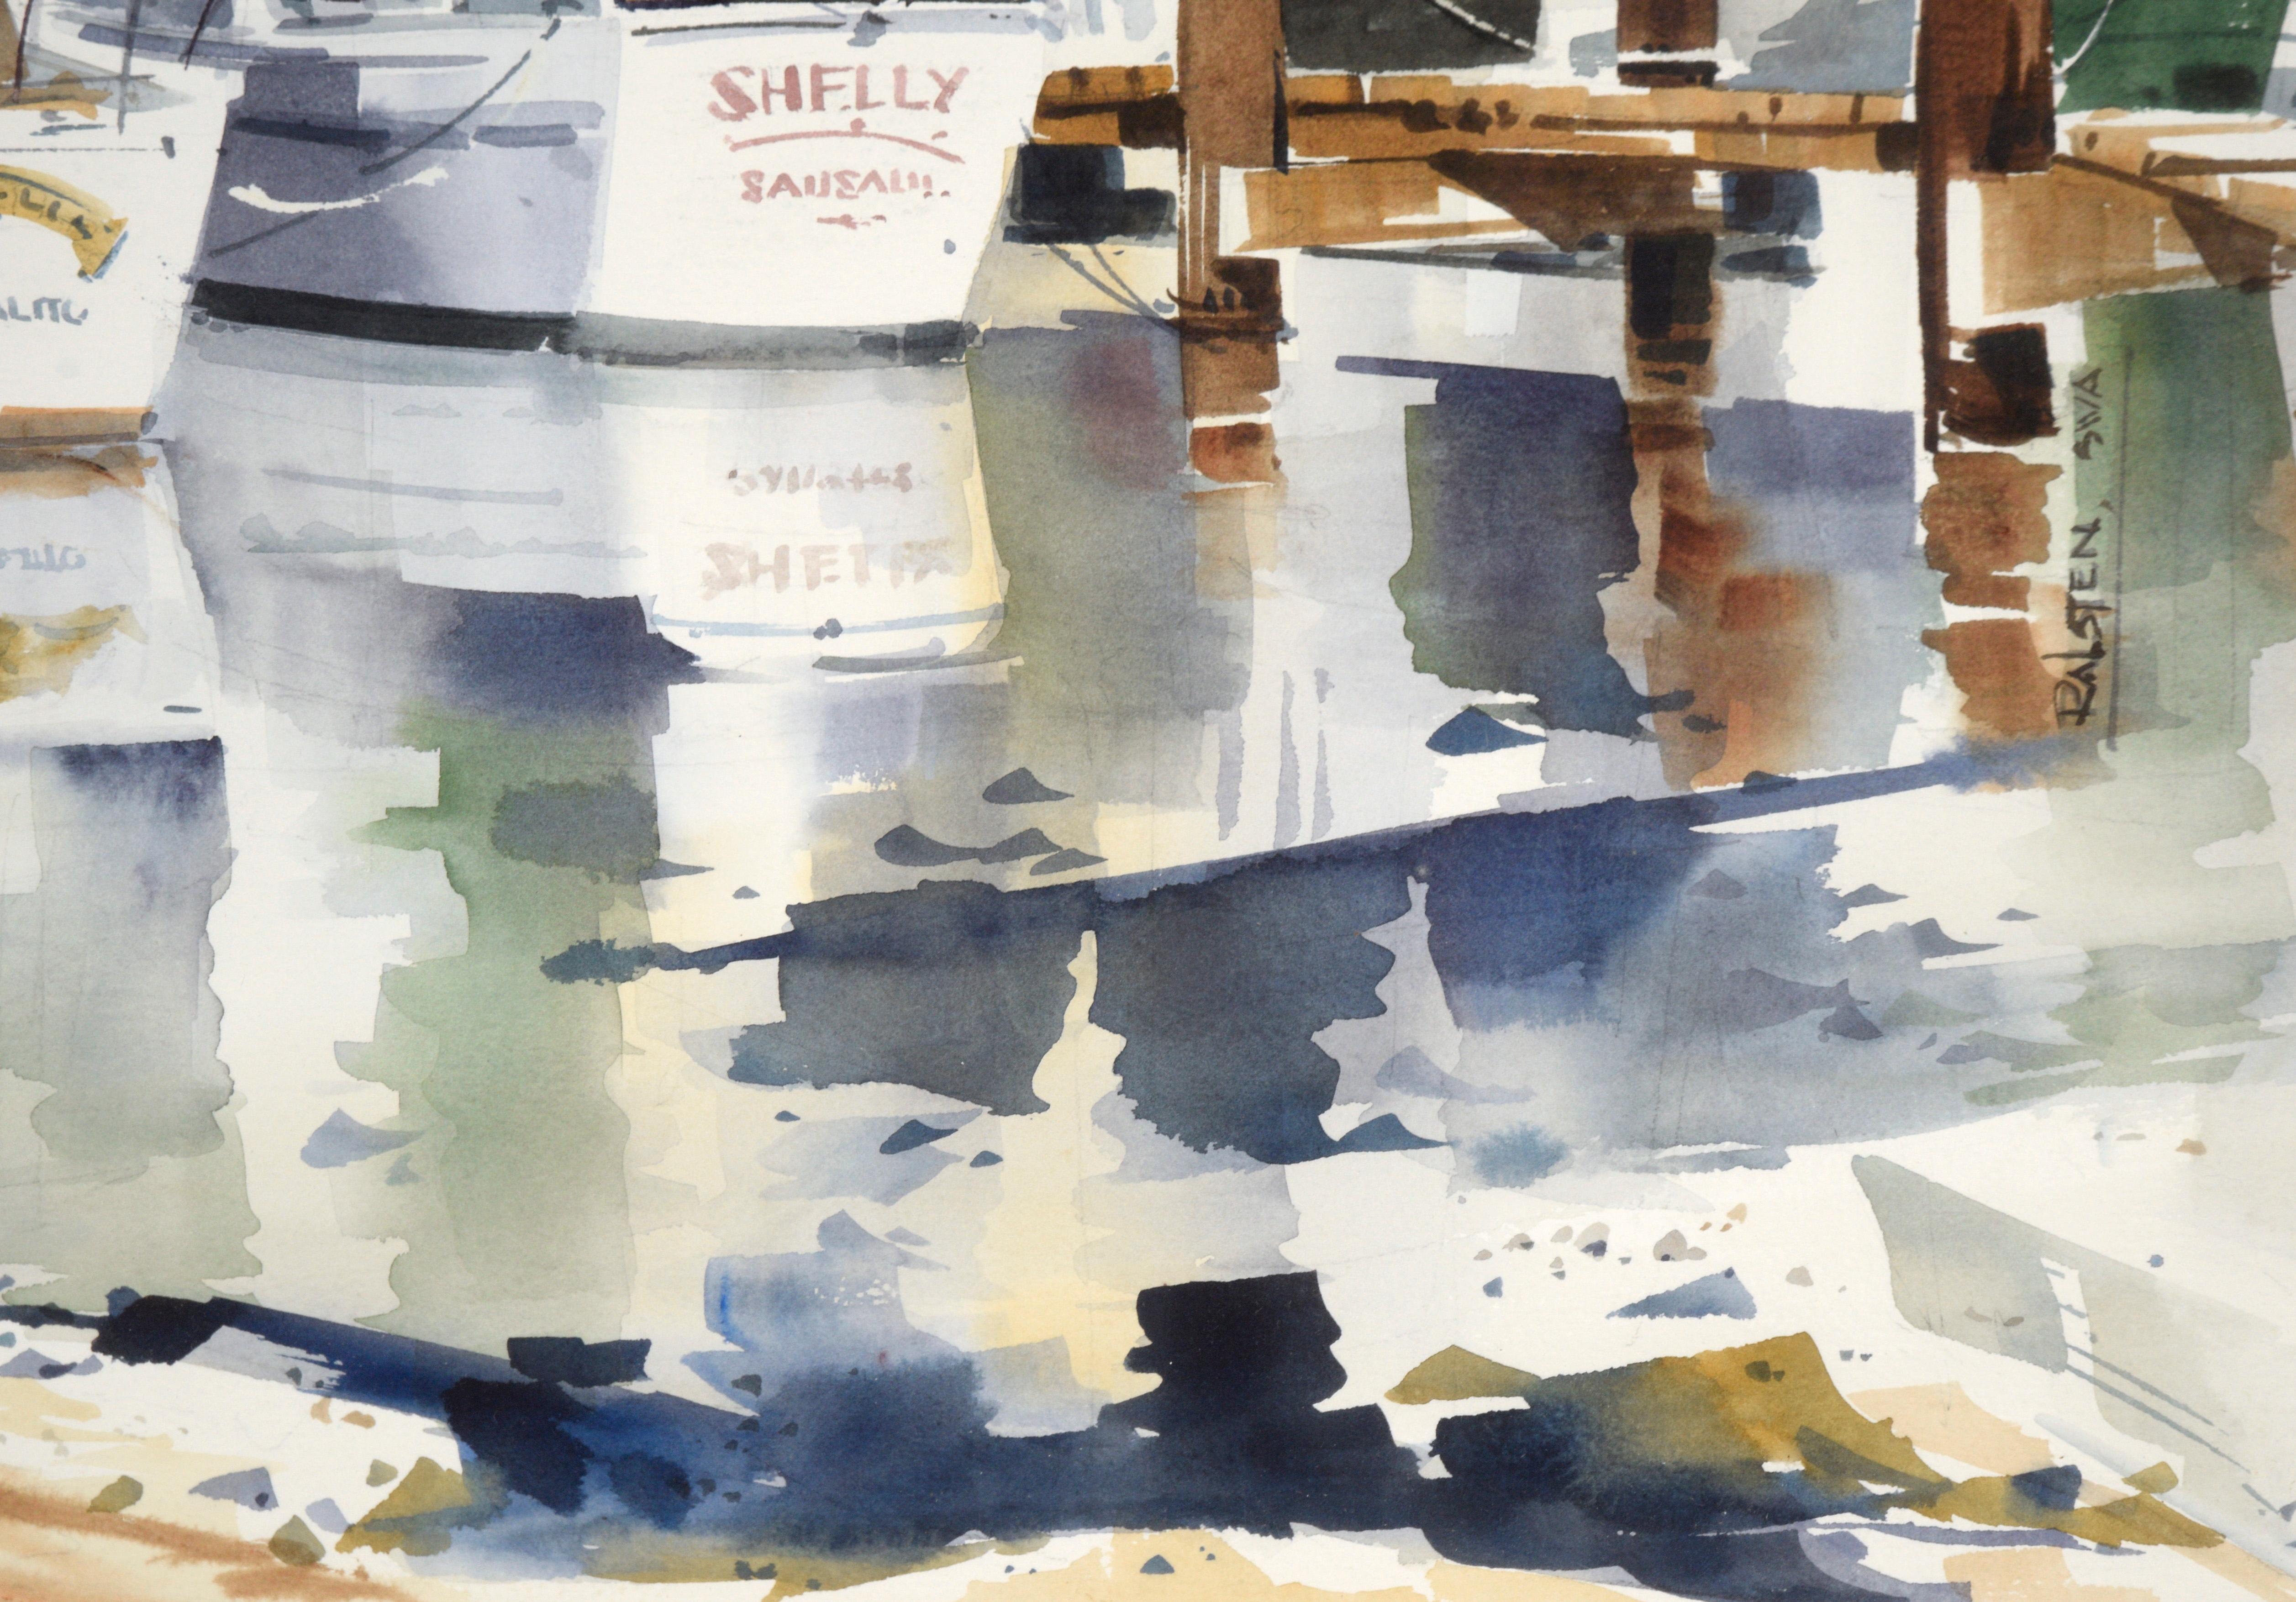 Boats at Sausalito Harbor - Watercolor on Paper

Harbor scene by Bay Area artist Ralsten (American, 20th Century). Many boats are docked in the harbor. One of them is being cleaned by a man in a red shirt. The piece is wonderfully detailed, with